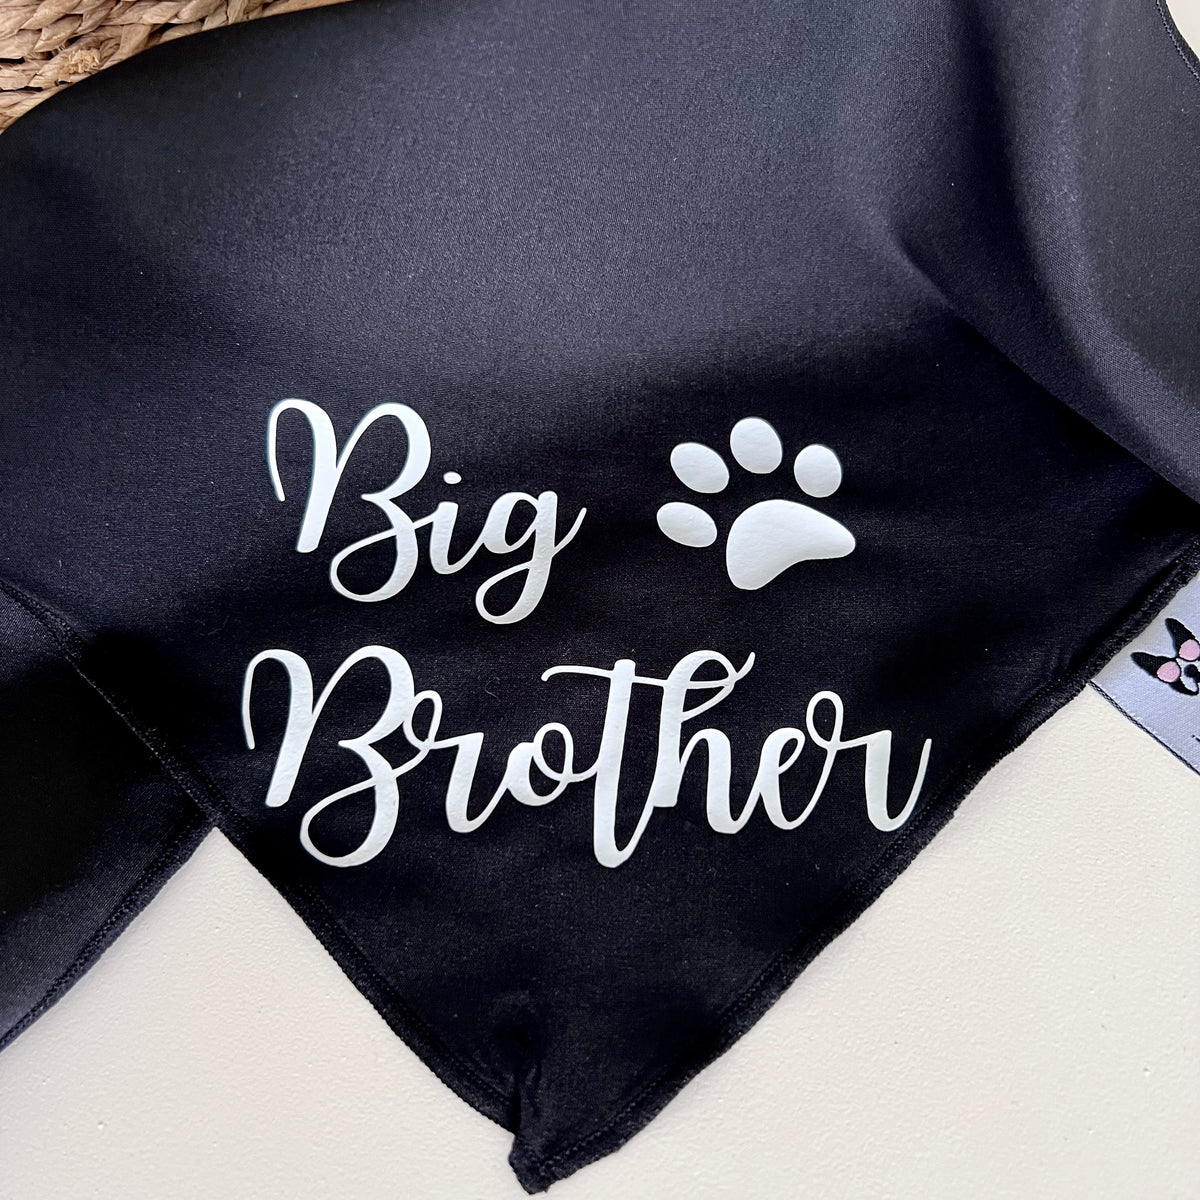 Dog Bandana - "Big Brother" with paw - Pregnancy or Birth Announcement